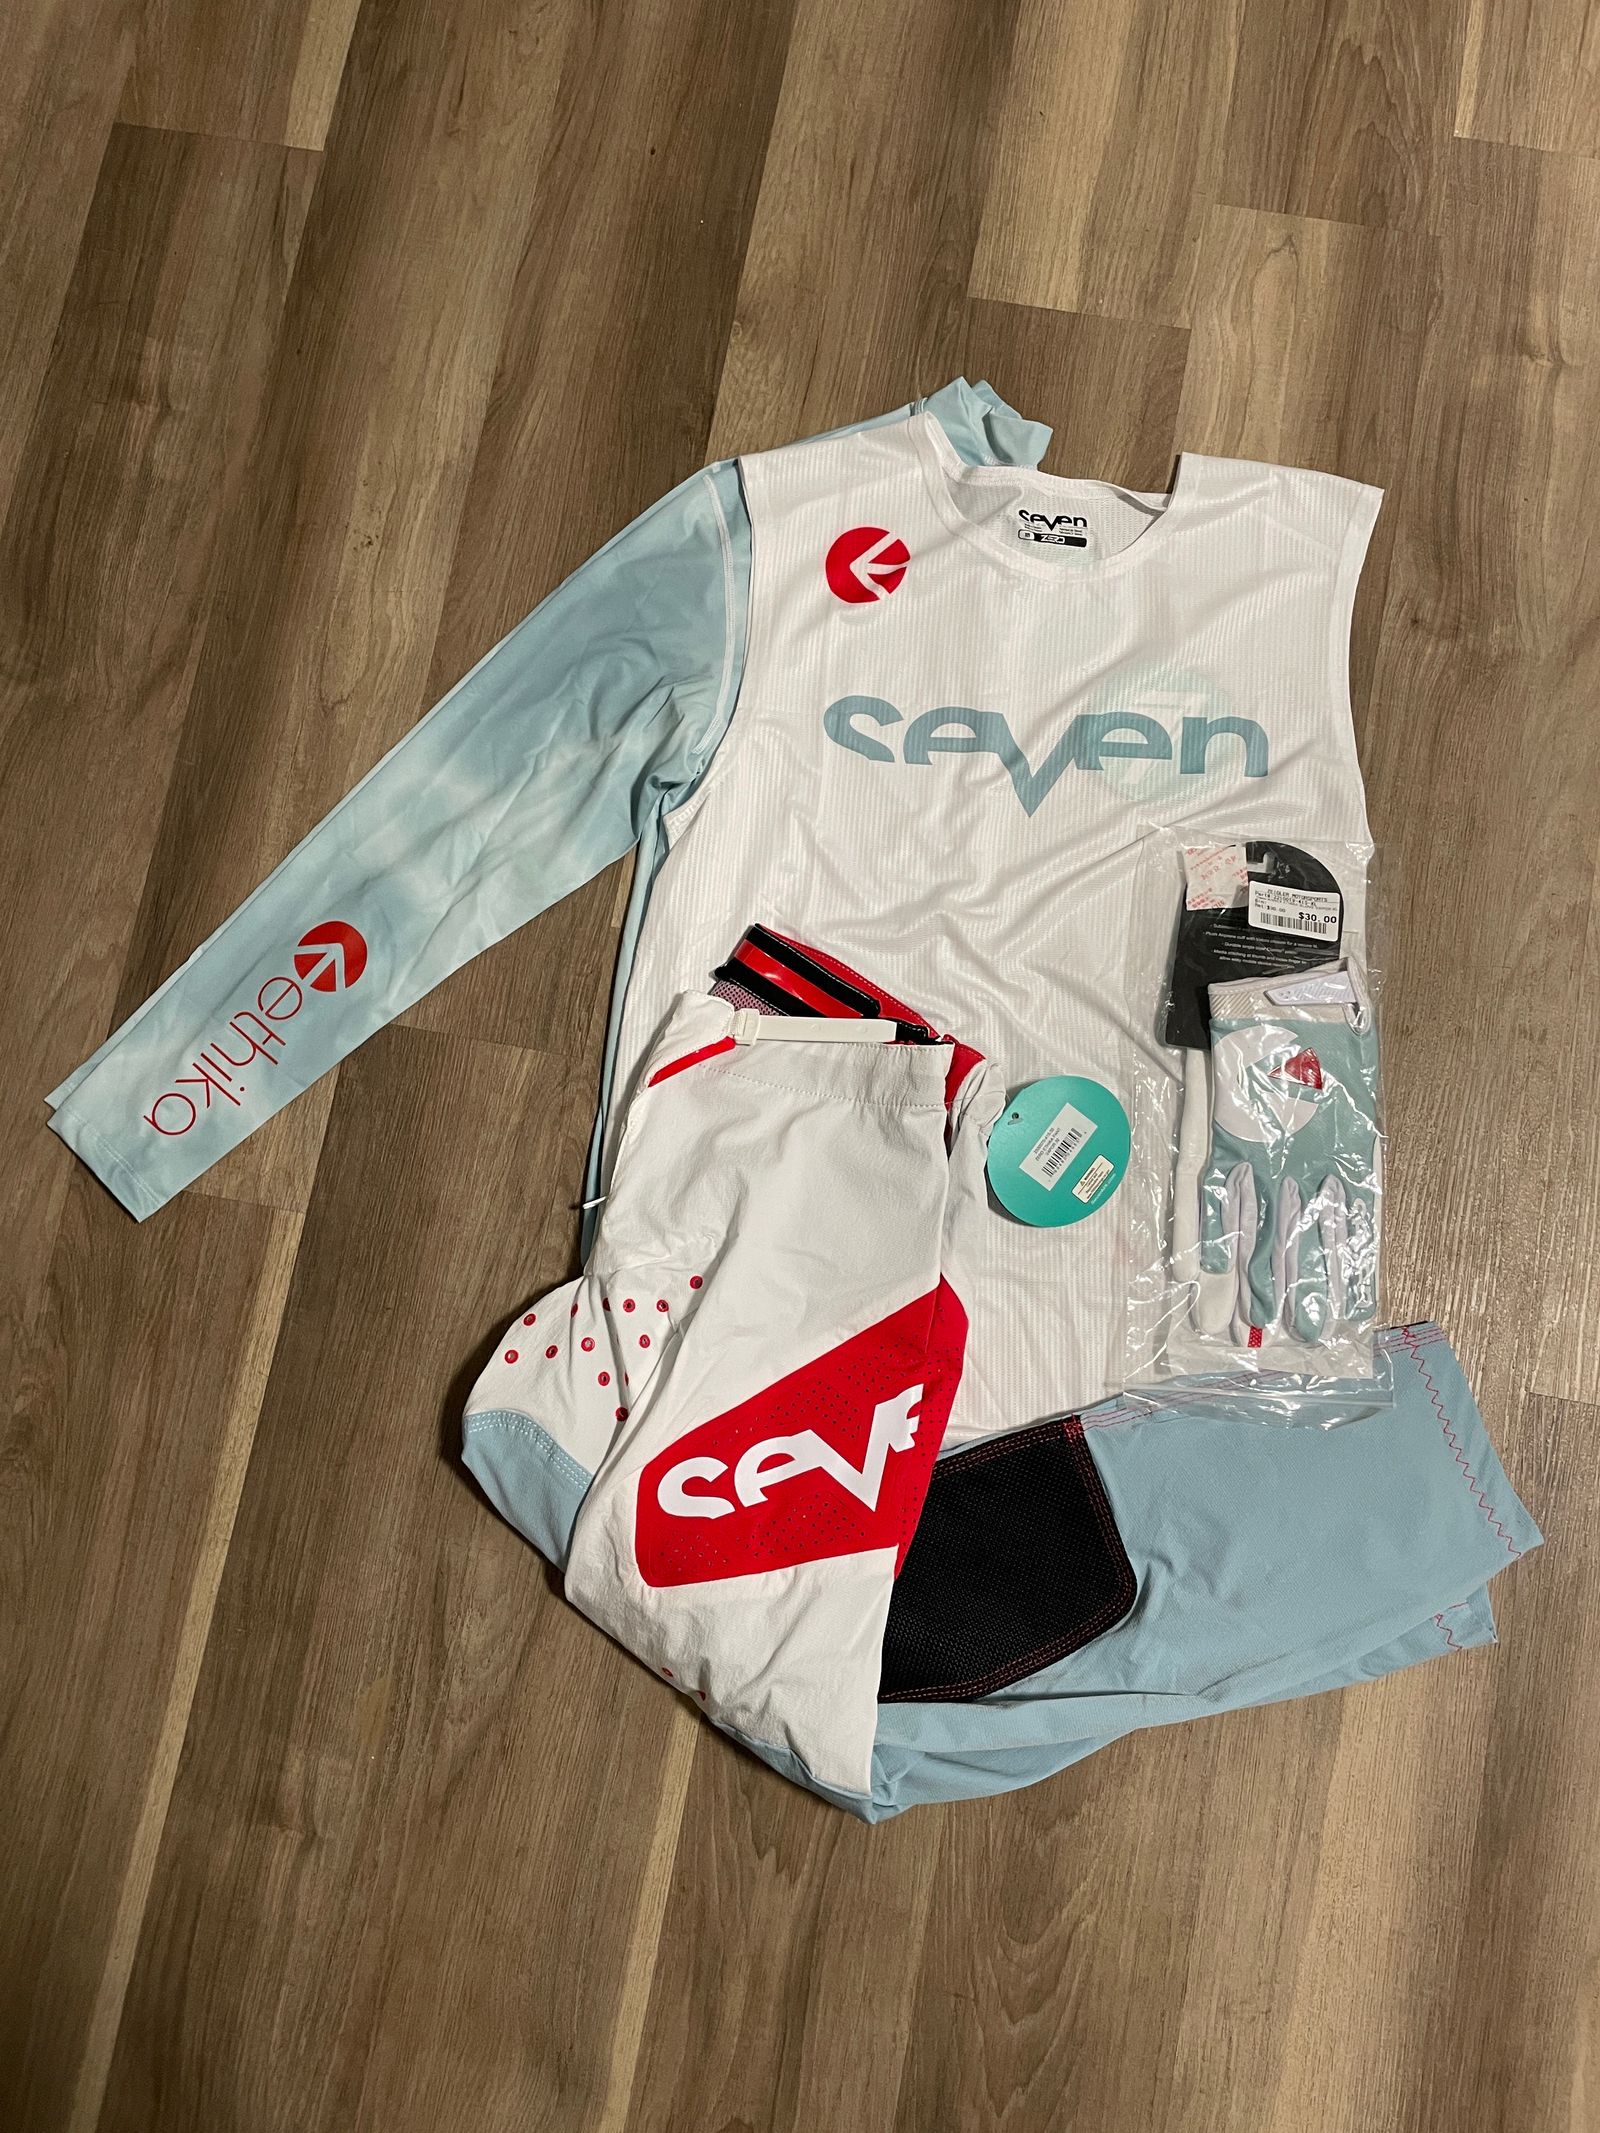 Seven MX - Vox Ethika Le Jersey (Youth)